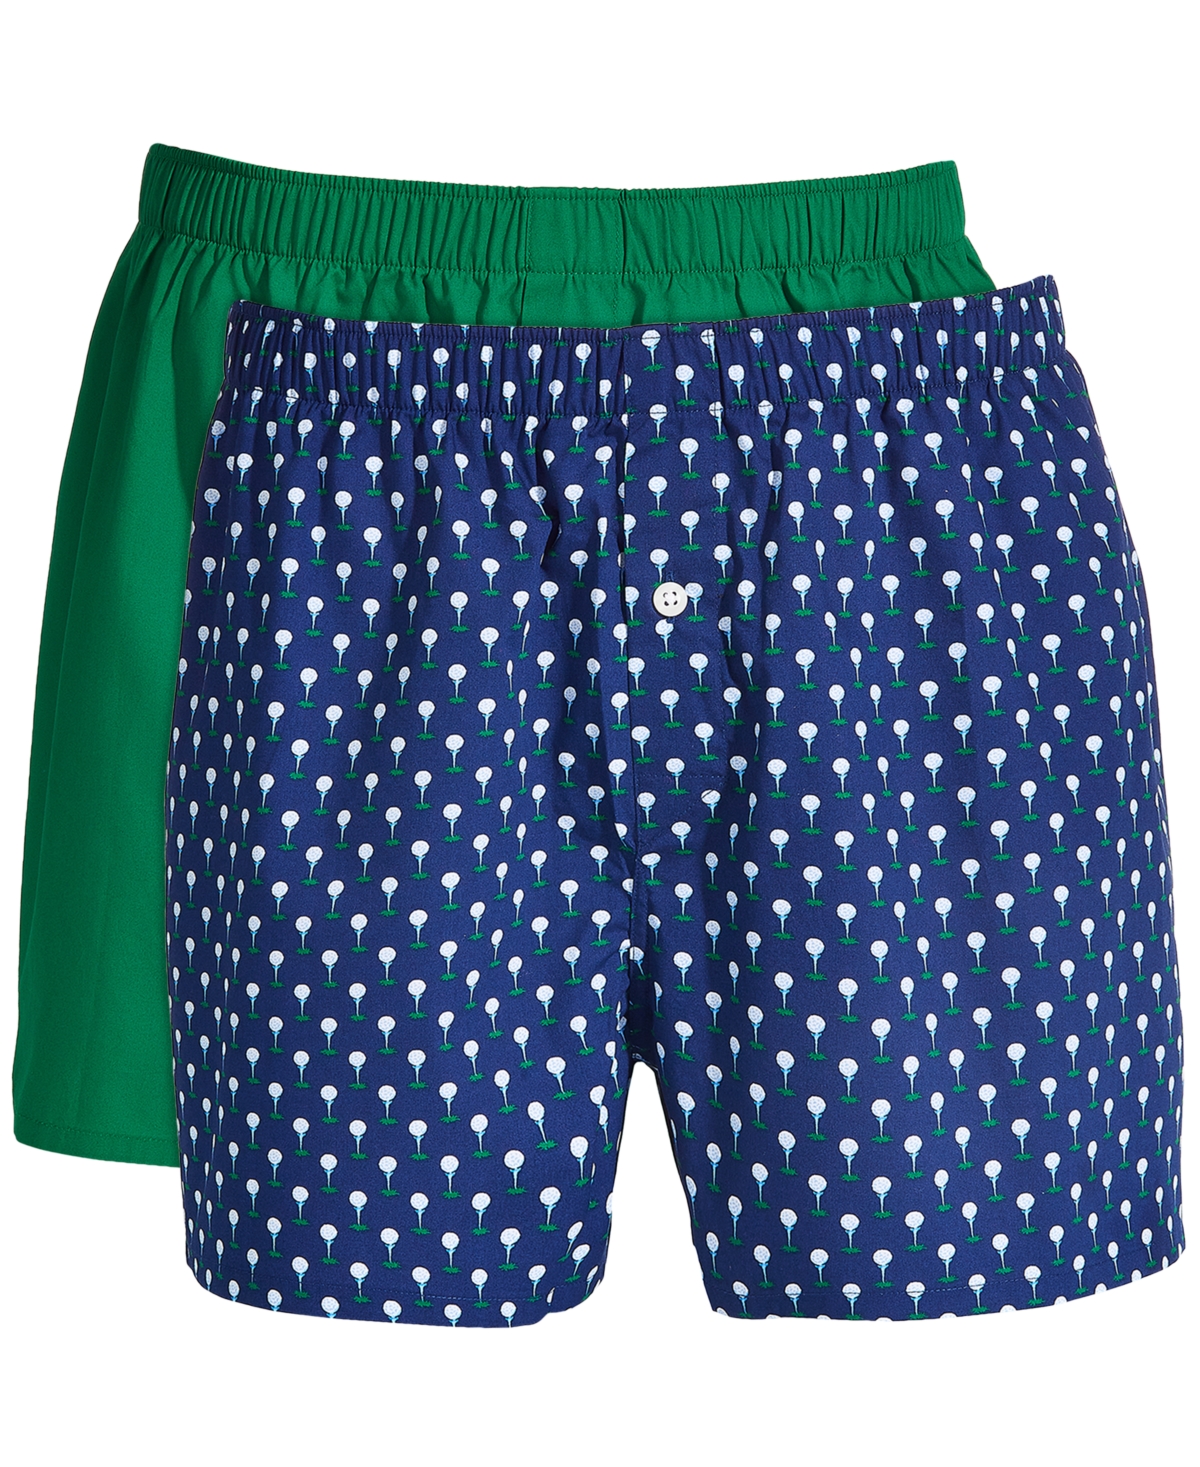 Men's 2-Pk. Regular-Fit Cotton Boxers, Created for Macy's - Verbrant Green